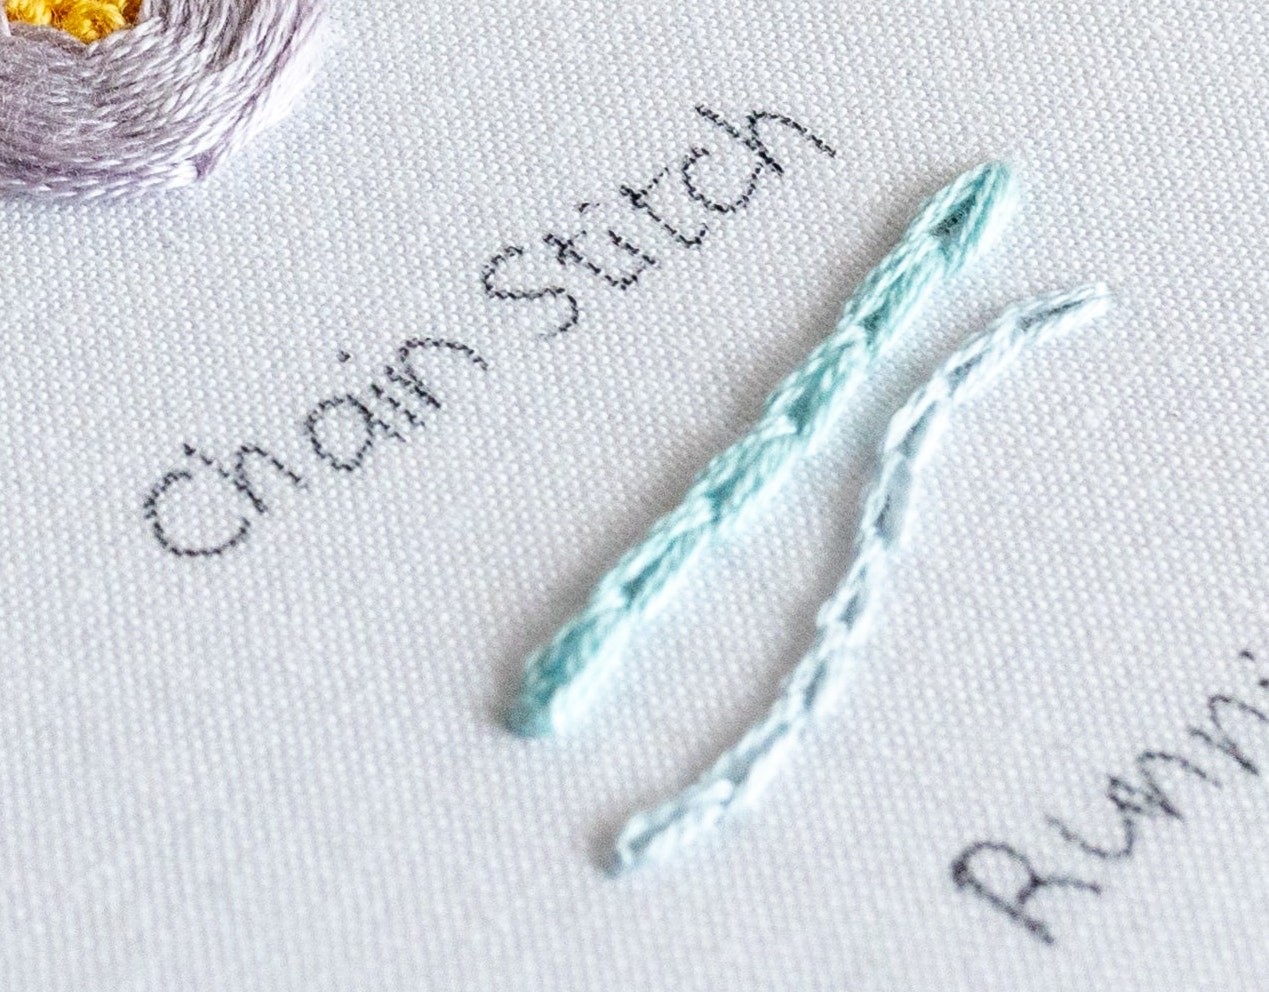 This image shows chain stitch being created.